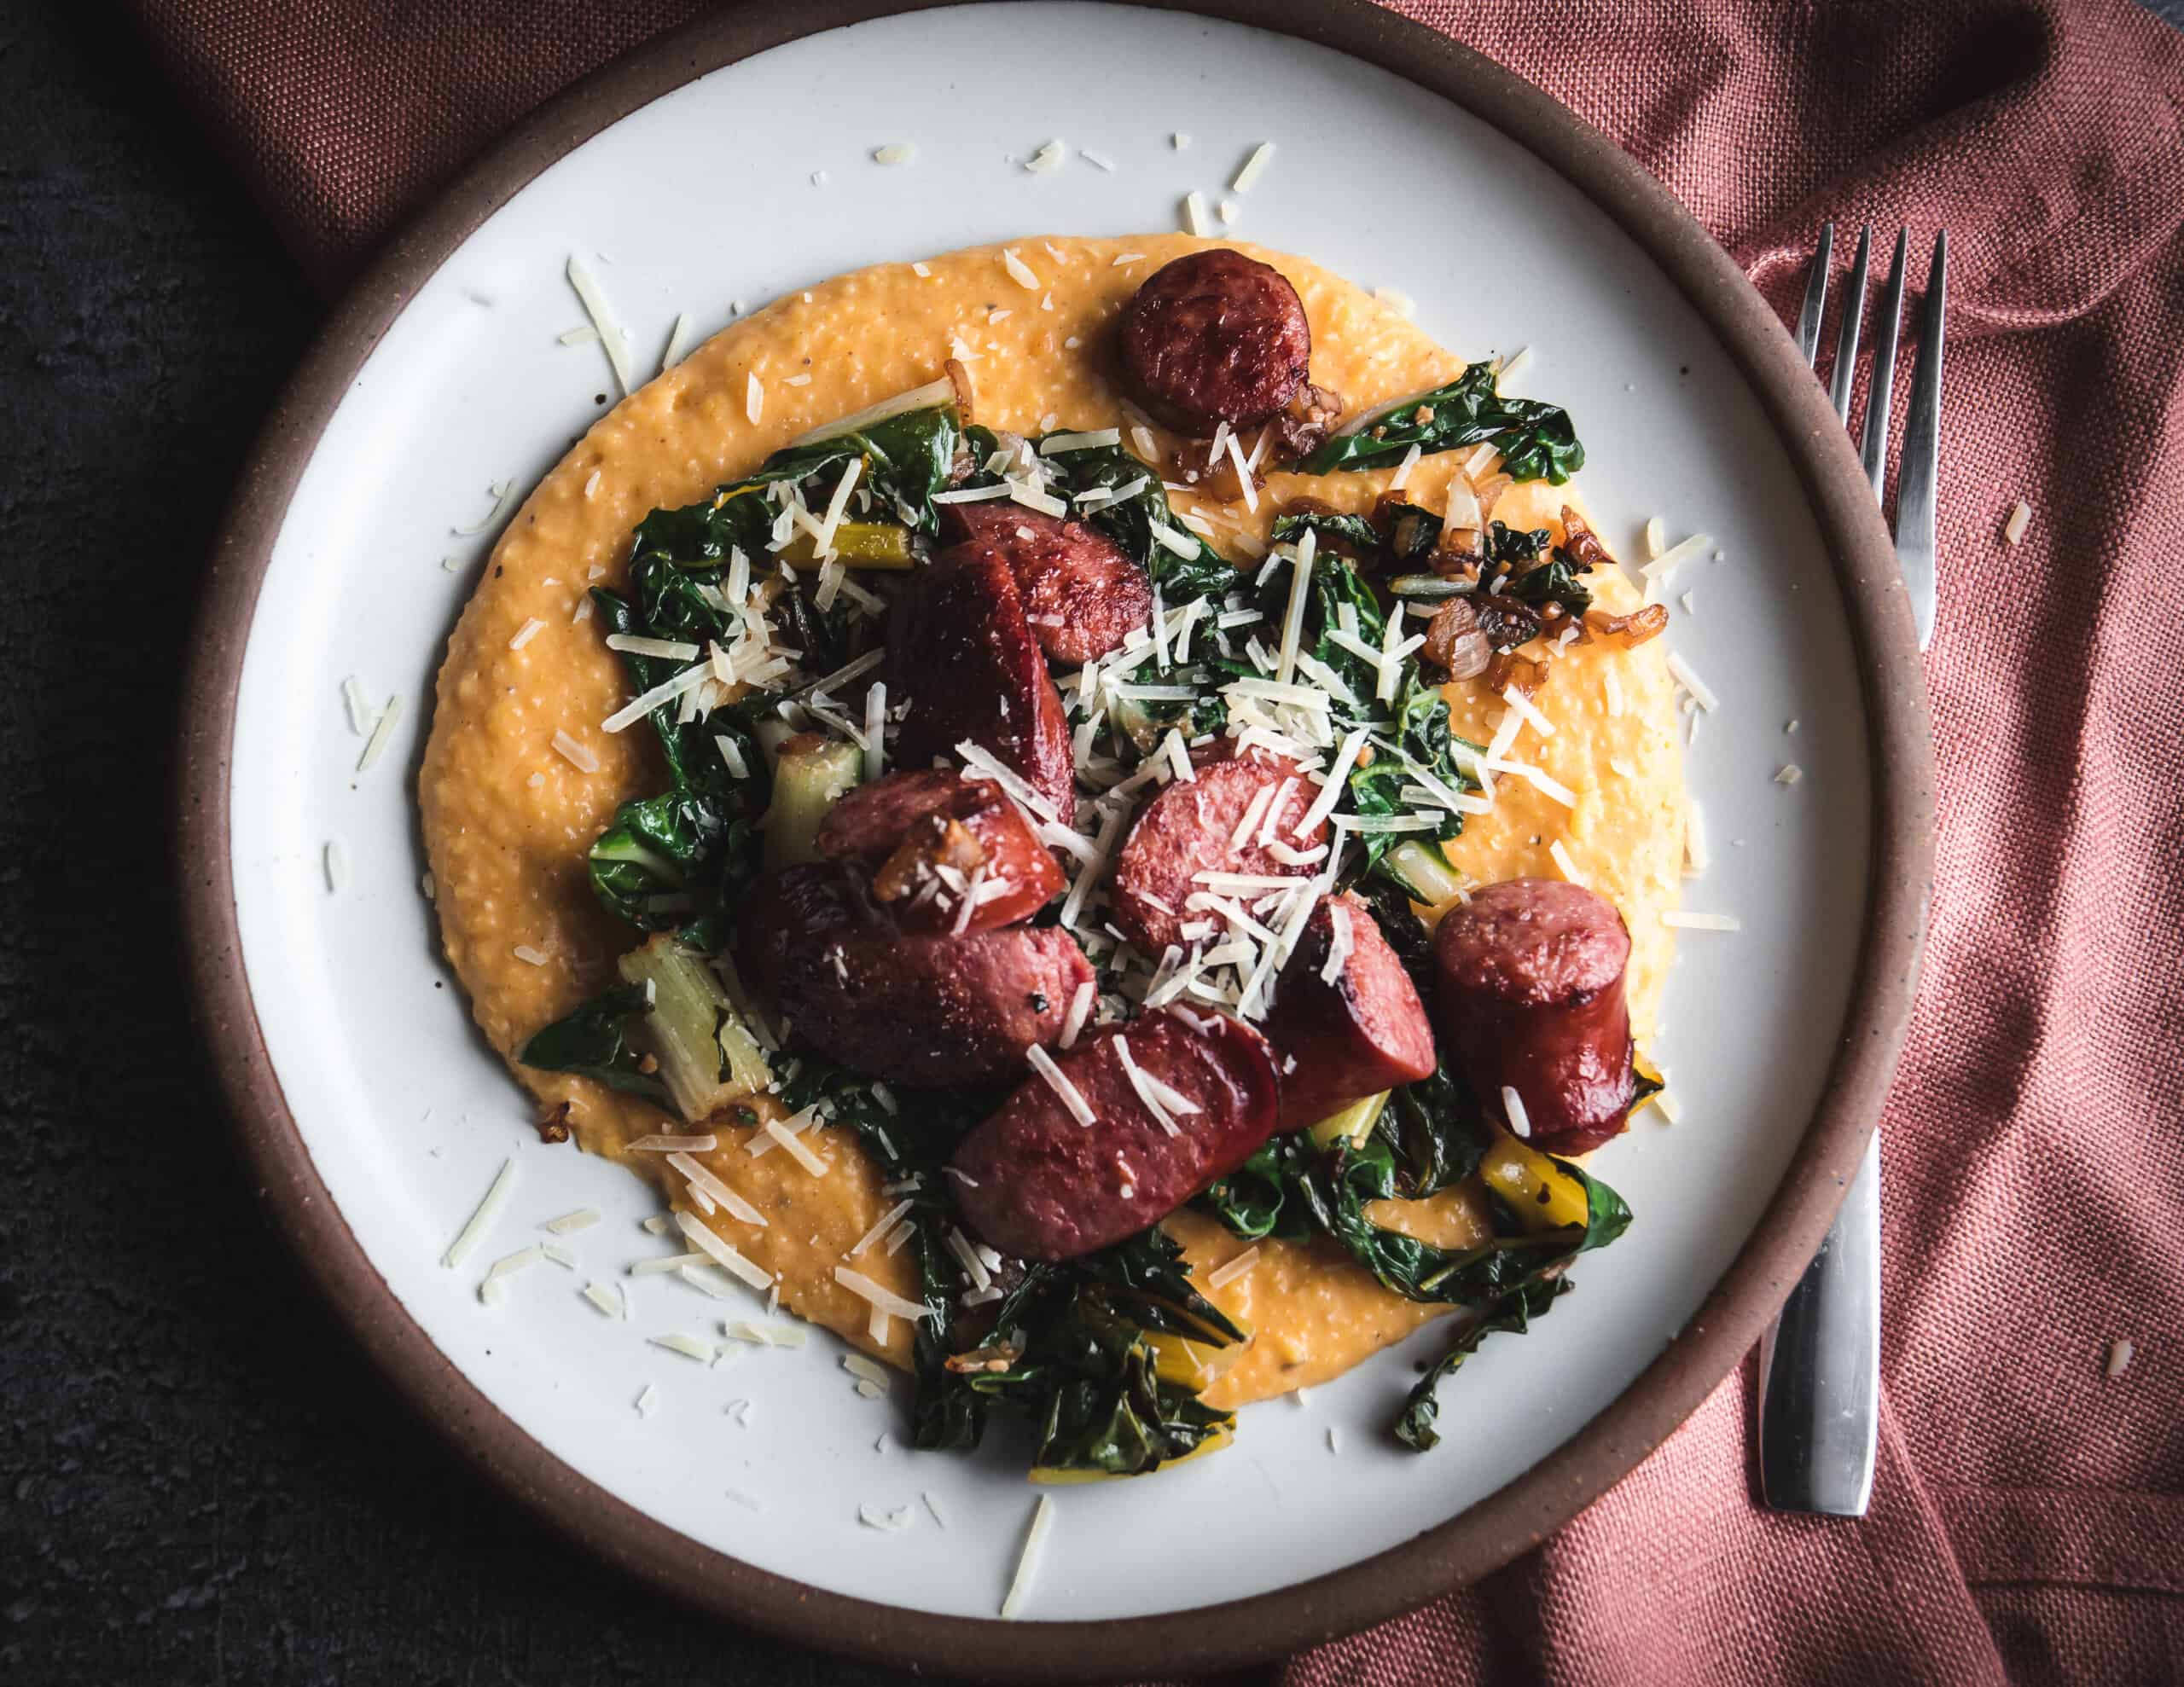 Plate of sweet potato polenta that is topped with cooked swiss chard, smoked sausage slices and grated parmesan cheese.